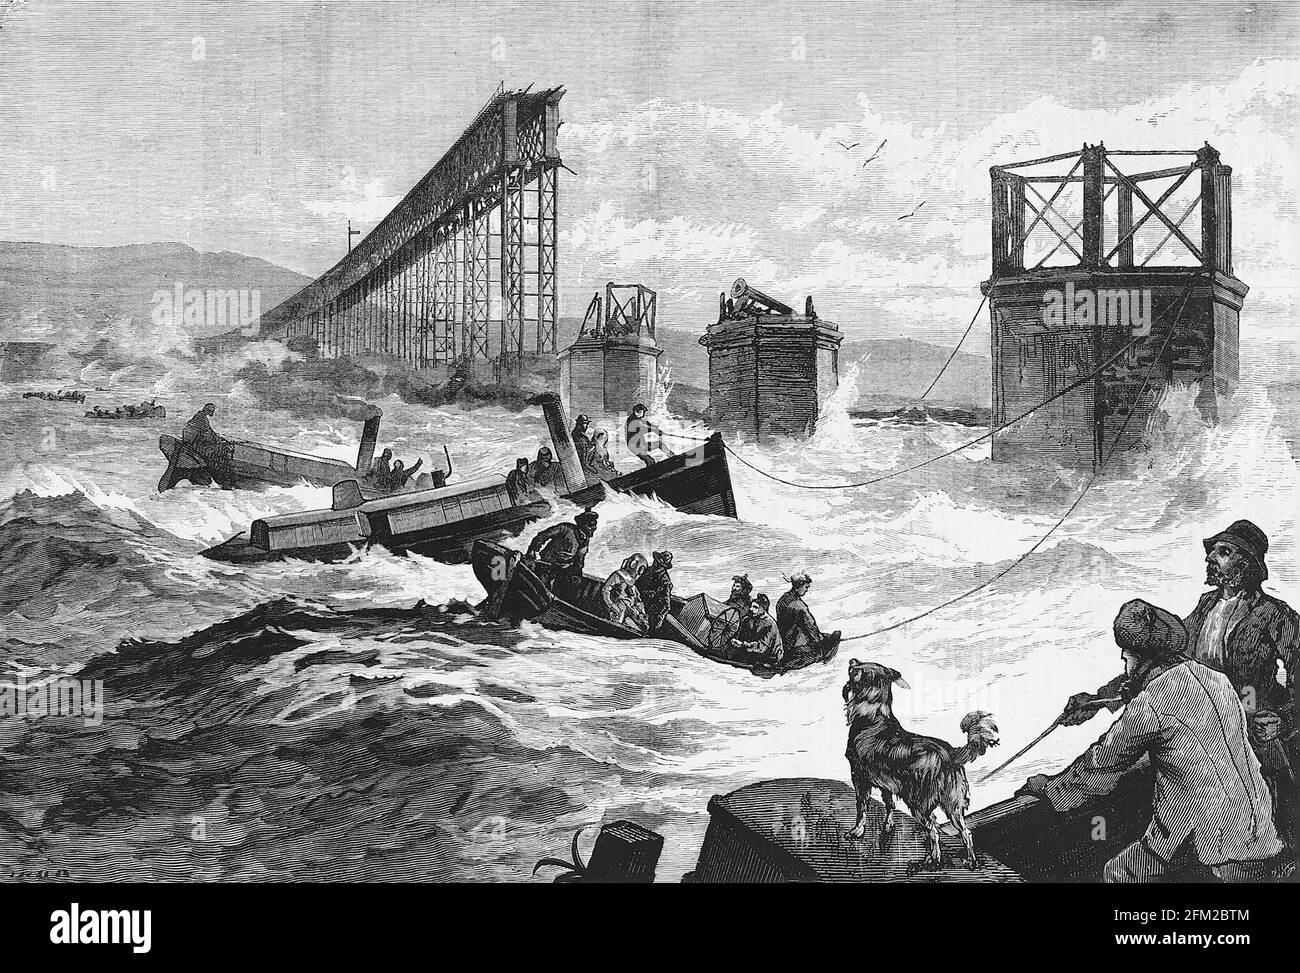 Tay Bridge Disaster. Illustration from the Illustrated London News, from January 1880, entitiled ' 'Steam Launches and Divers' Barge Employed in Search'. Stock Photo